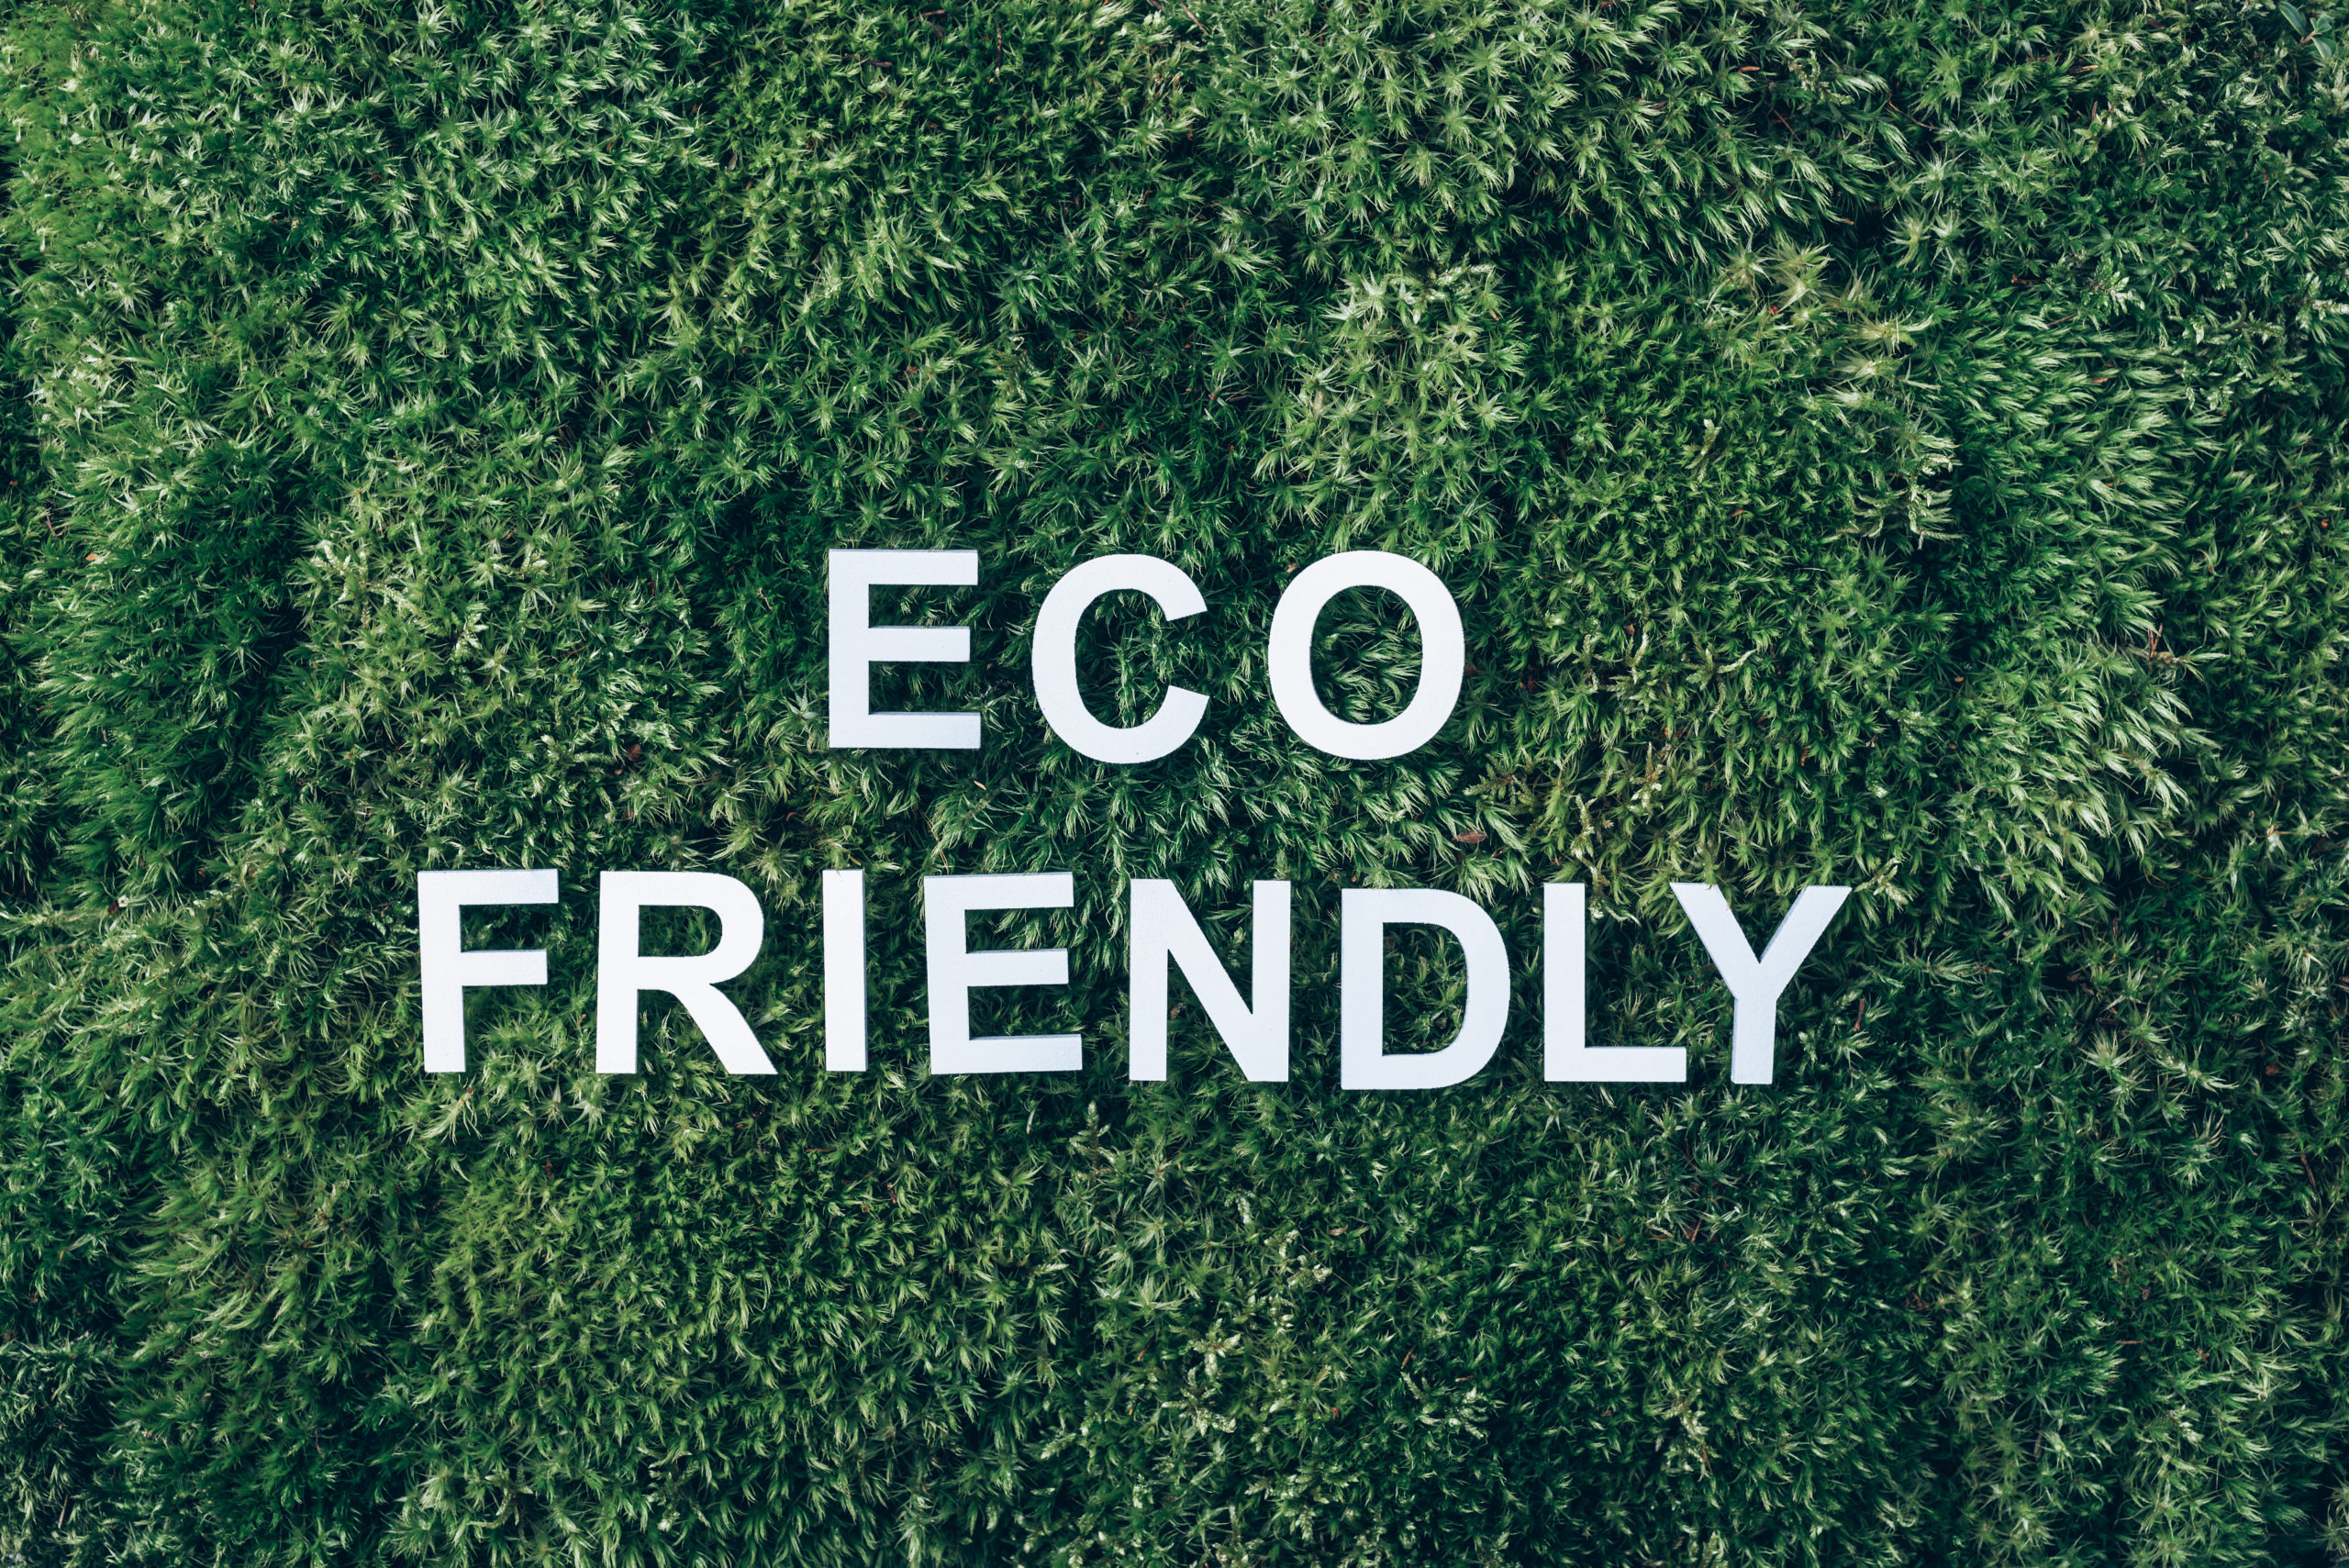 Inscription Eco friendly on moss, green grass background. Top view. Copy space. Banner. Biophilia concept. Nature backdrop.